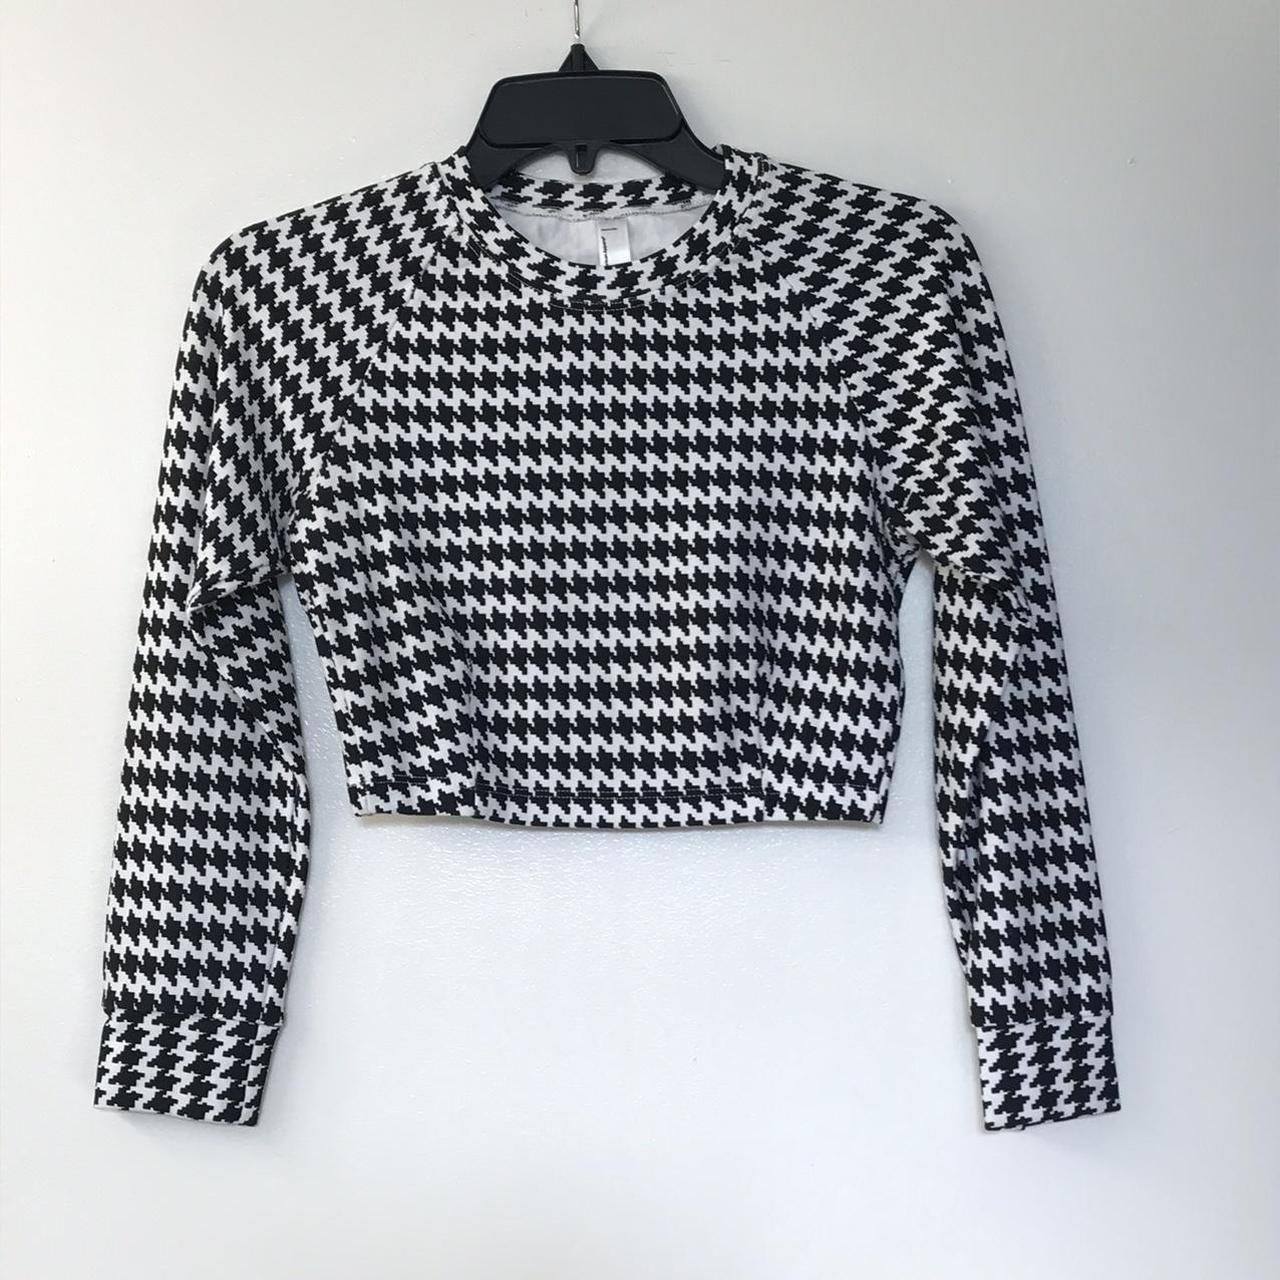 American Apparel Women's Black and White Crop-top